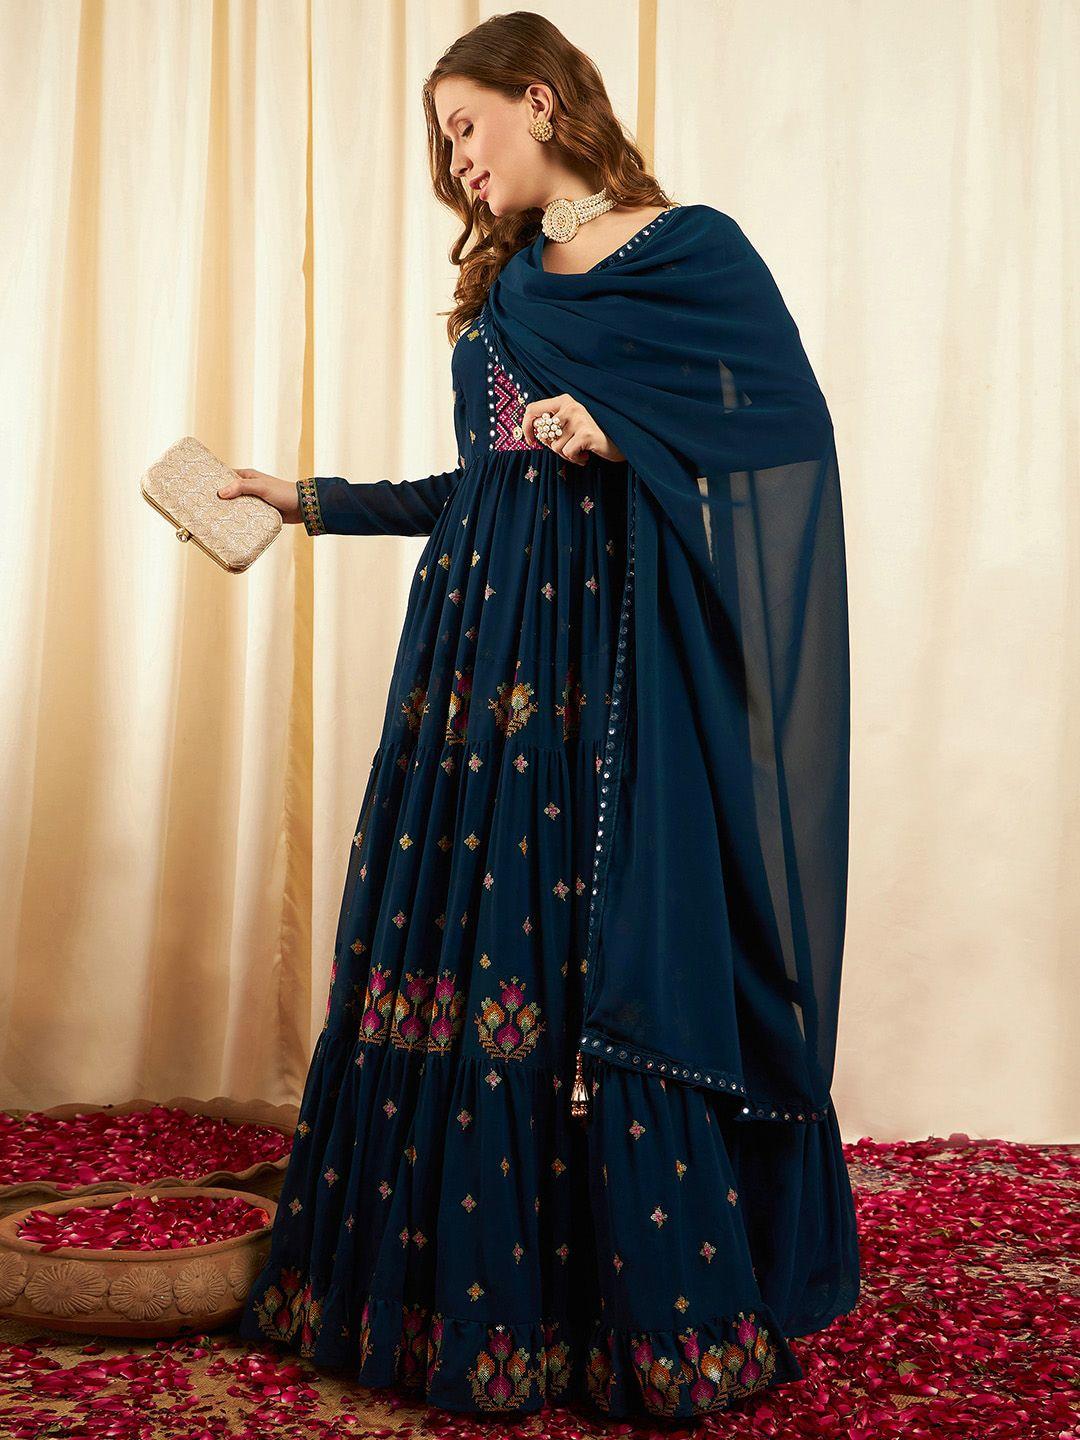 black-scissor-ethnic-motifs-embroidered-sequinned-detailed-maxi-ethnic-dress-with-dupatta